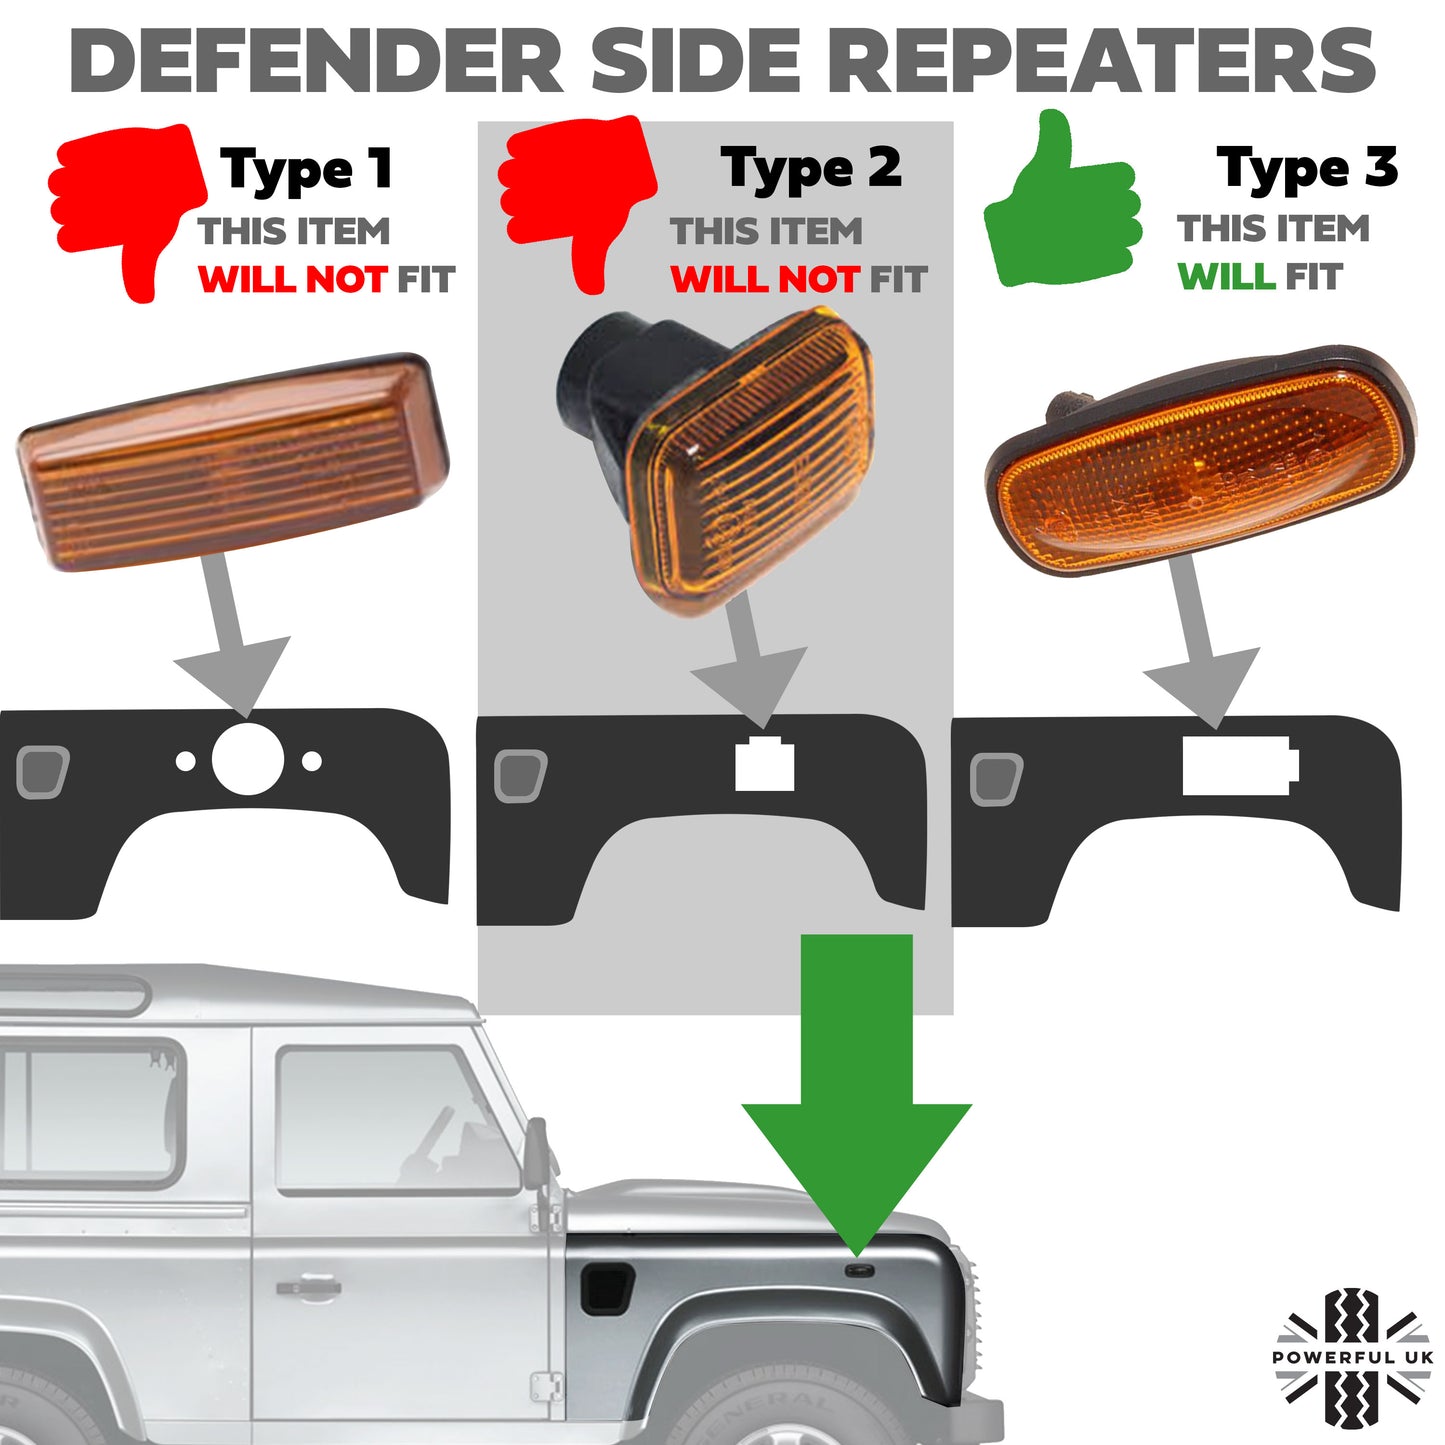 Side Repeaters (Pair) - LED - Smoked - Dynamic Sweep Land Rover Defender